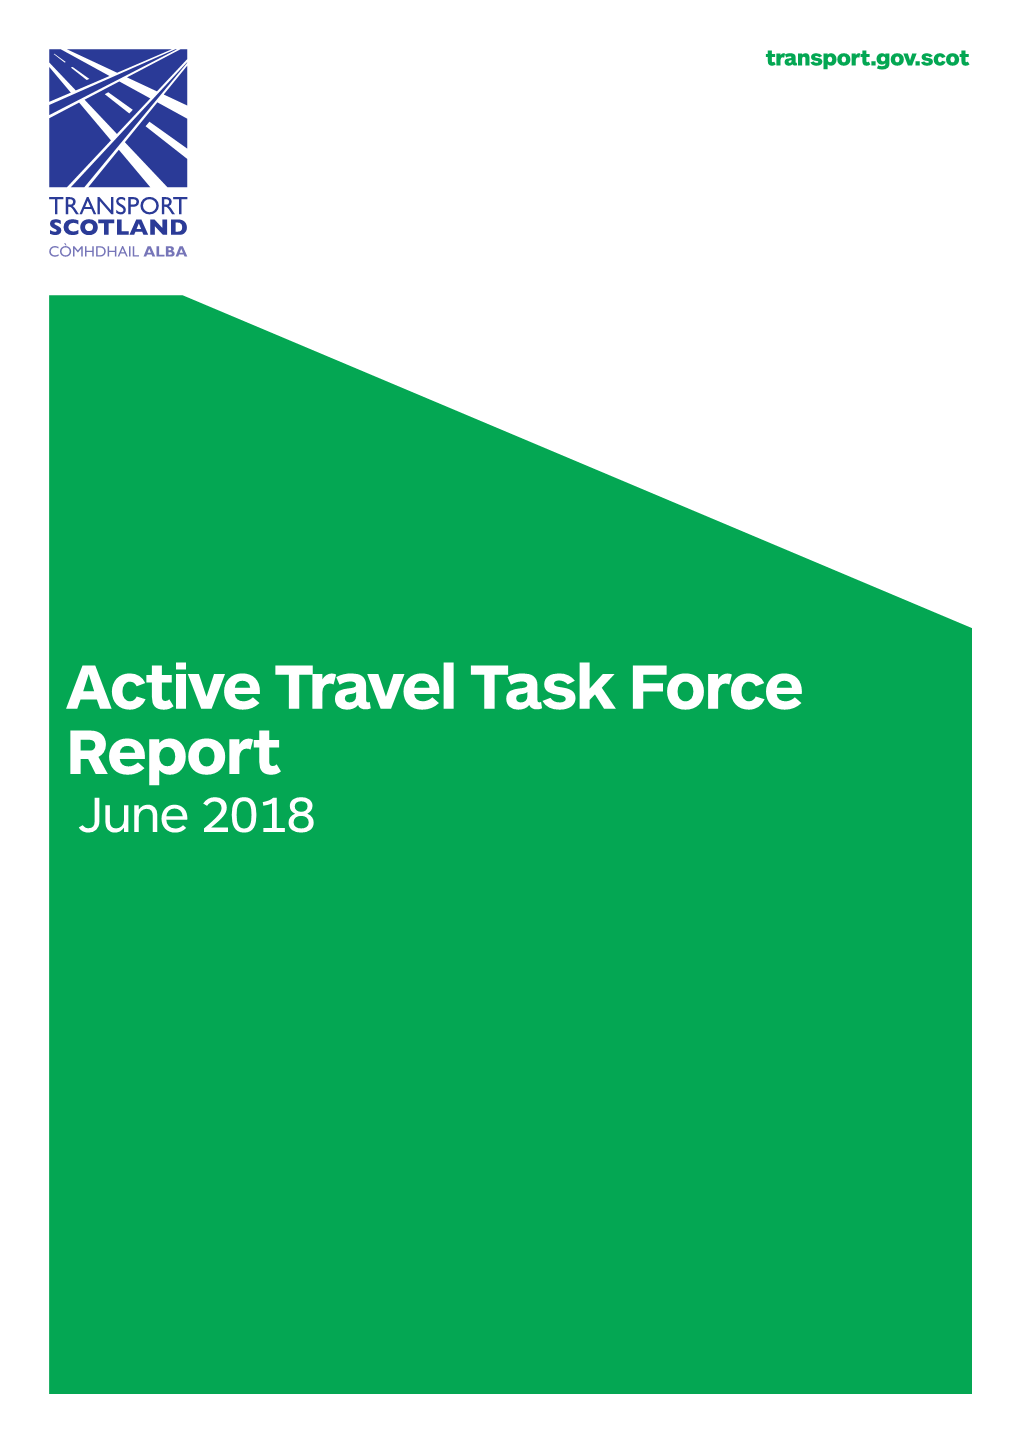 Active Travel Task Force Report June 2018 Active Travel Task Force Transport Scotland